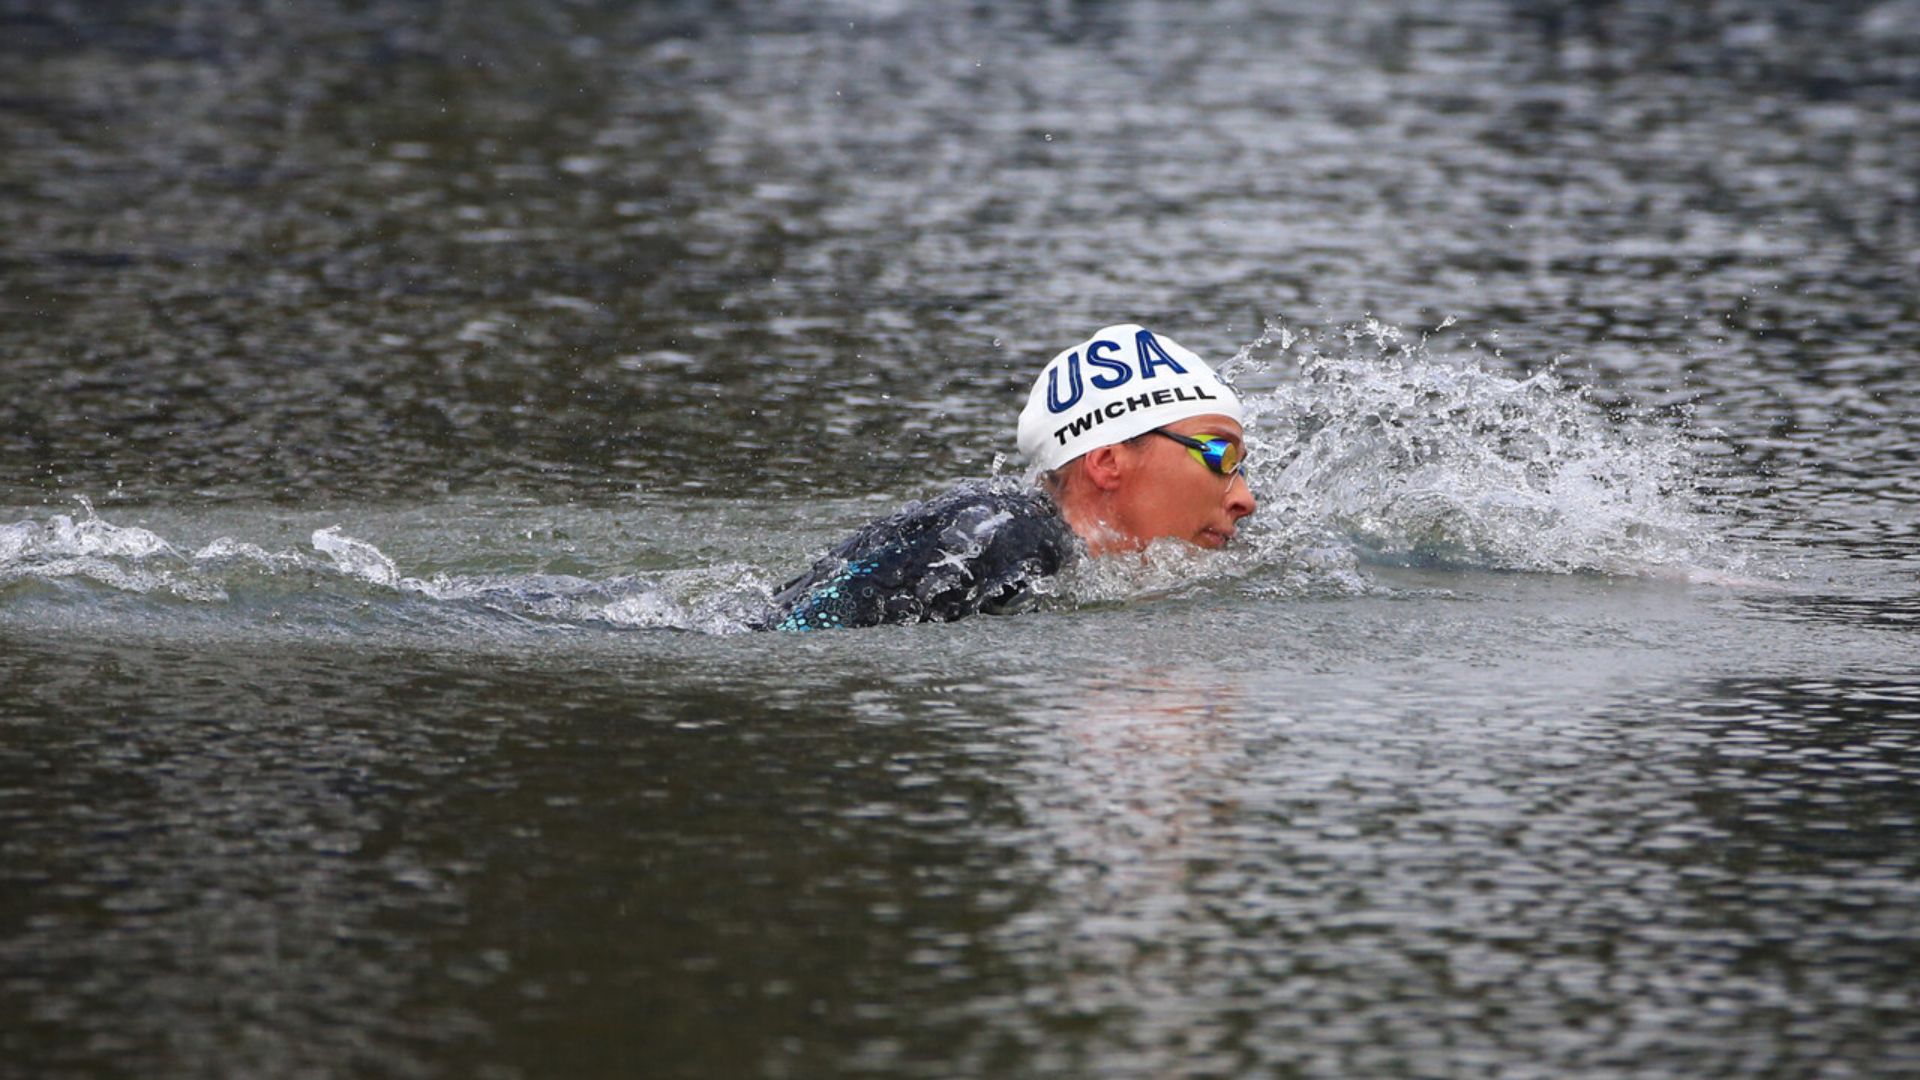 American Ashley Twichell Won Gold in the 10-kilometer Open Water Swimming